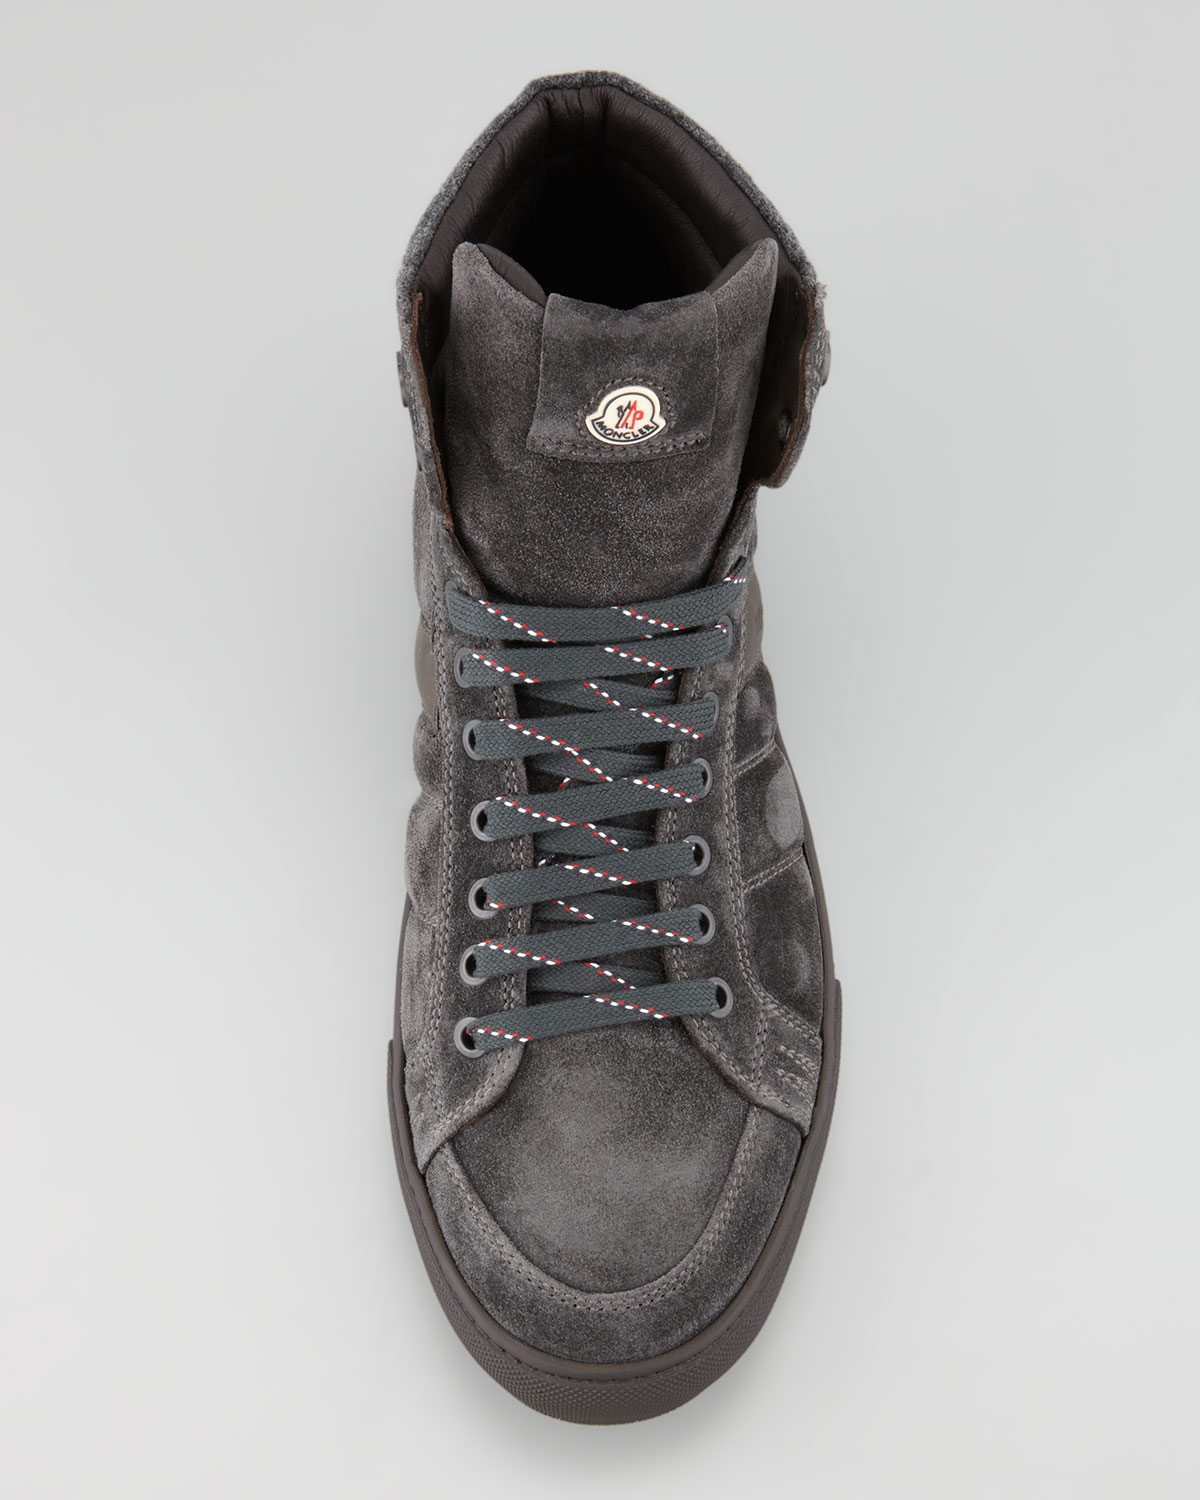 Moncler Lyon Suede High Top Sneaker in Gray for Men - Lyst